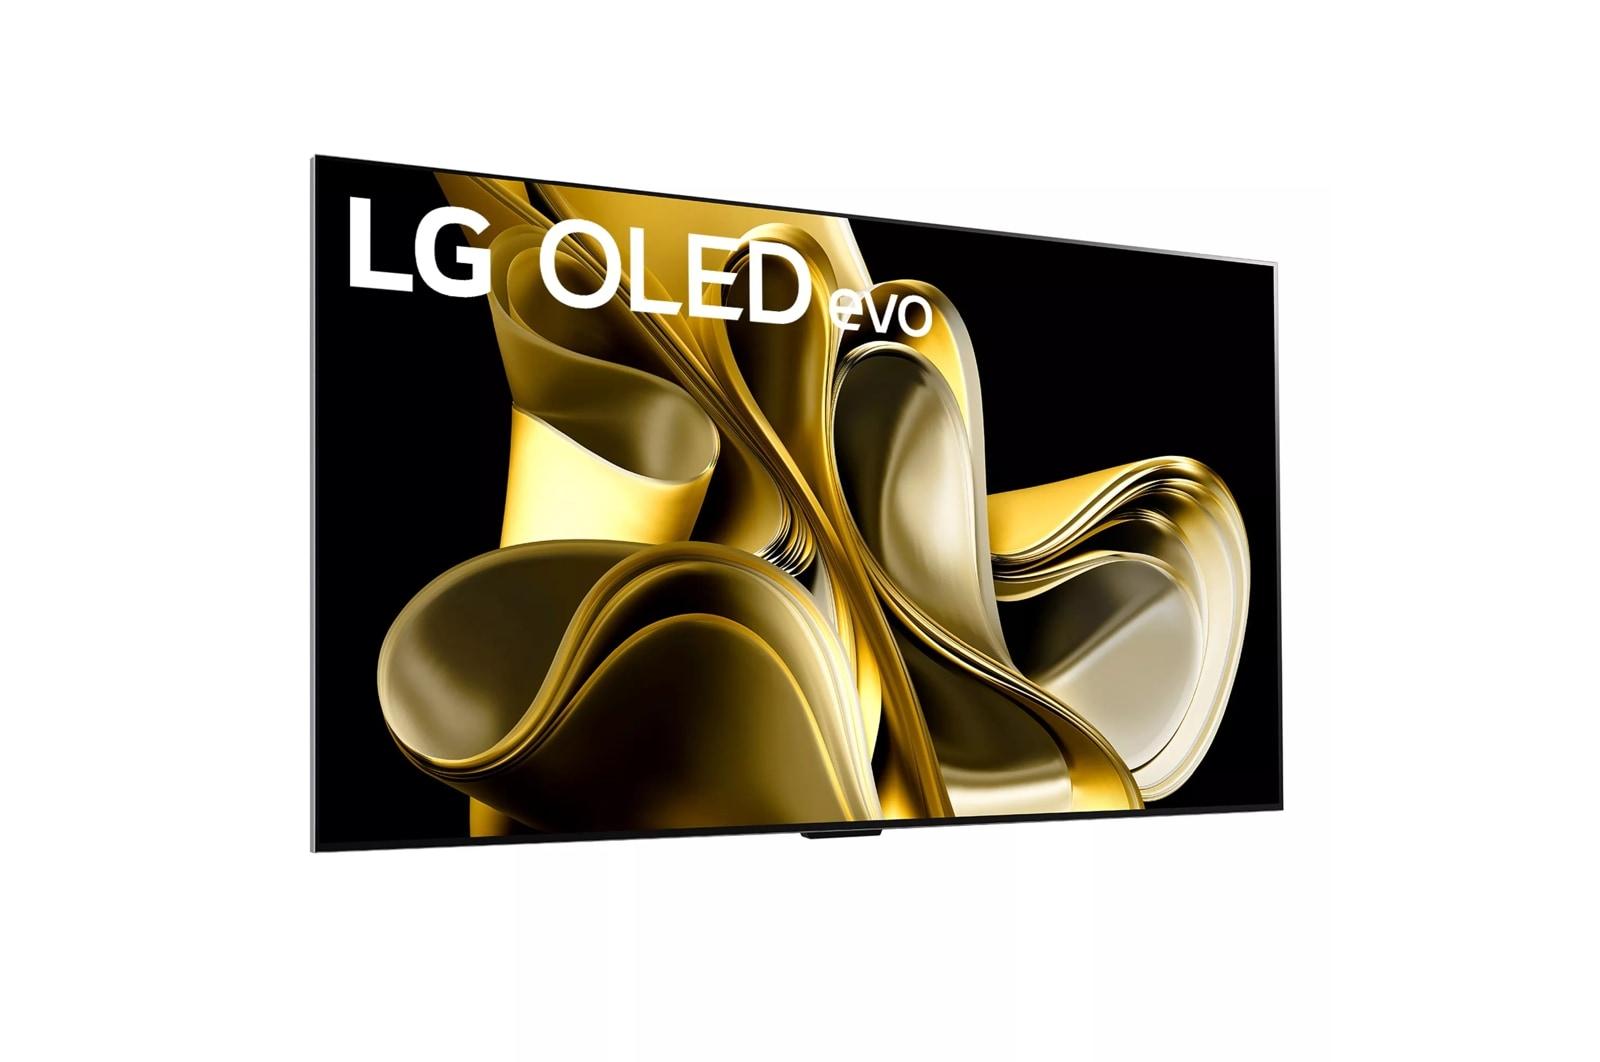 LG OLED evo M Series 83-Inch Class 4K Smart TV with Wireless 4K Connectivity